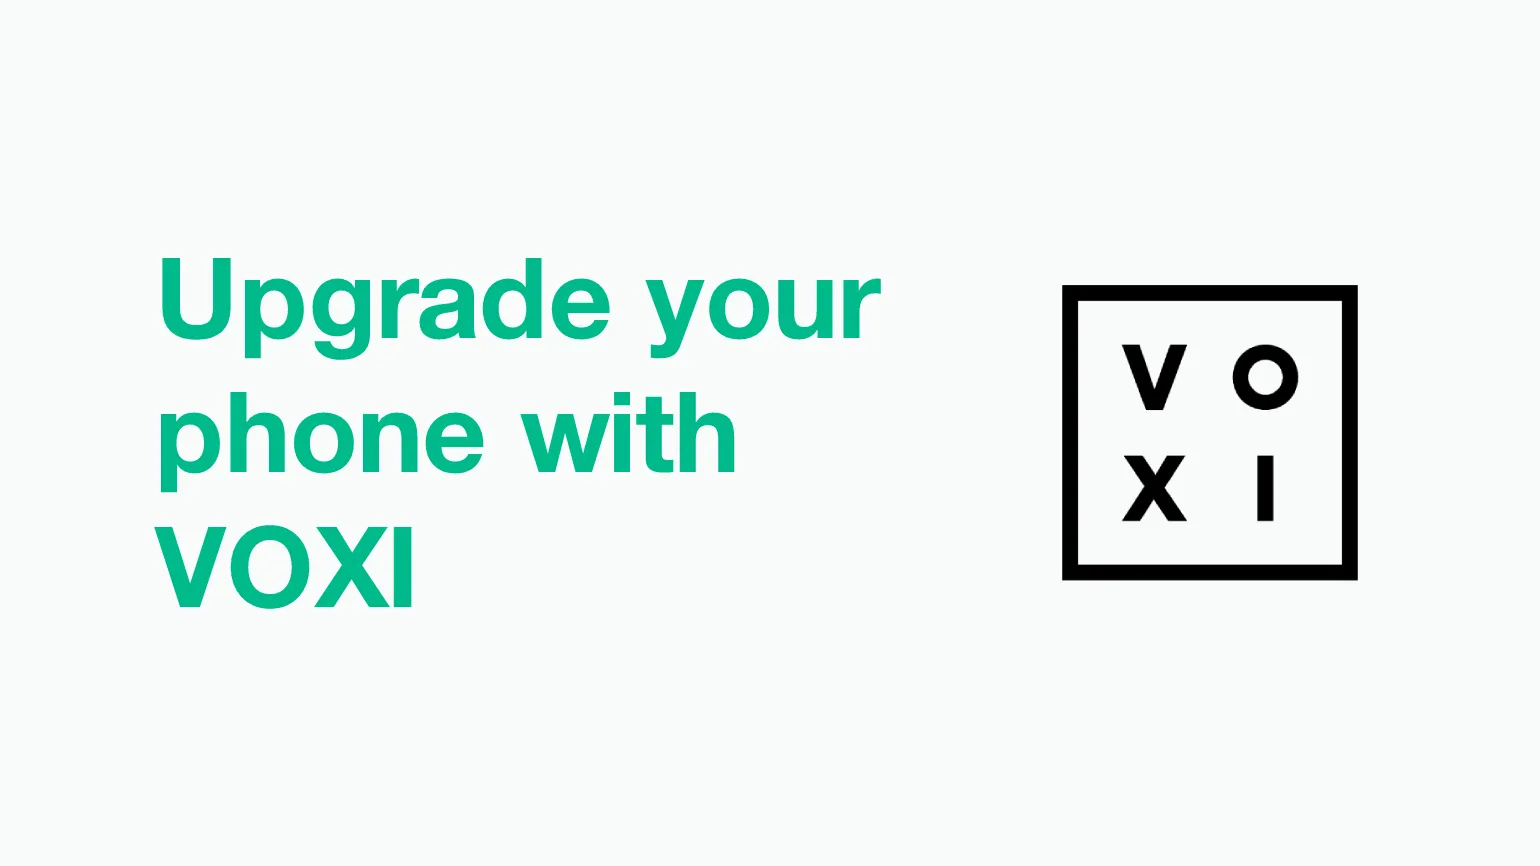 Upgrading your phone on VOXI